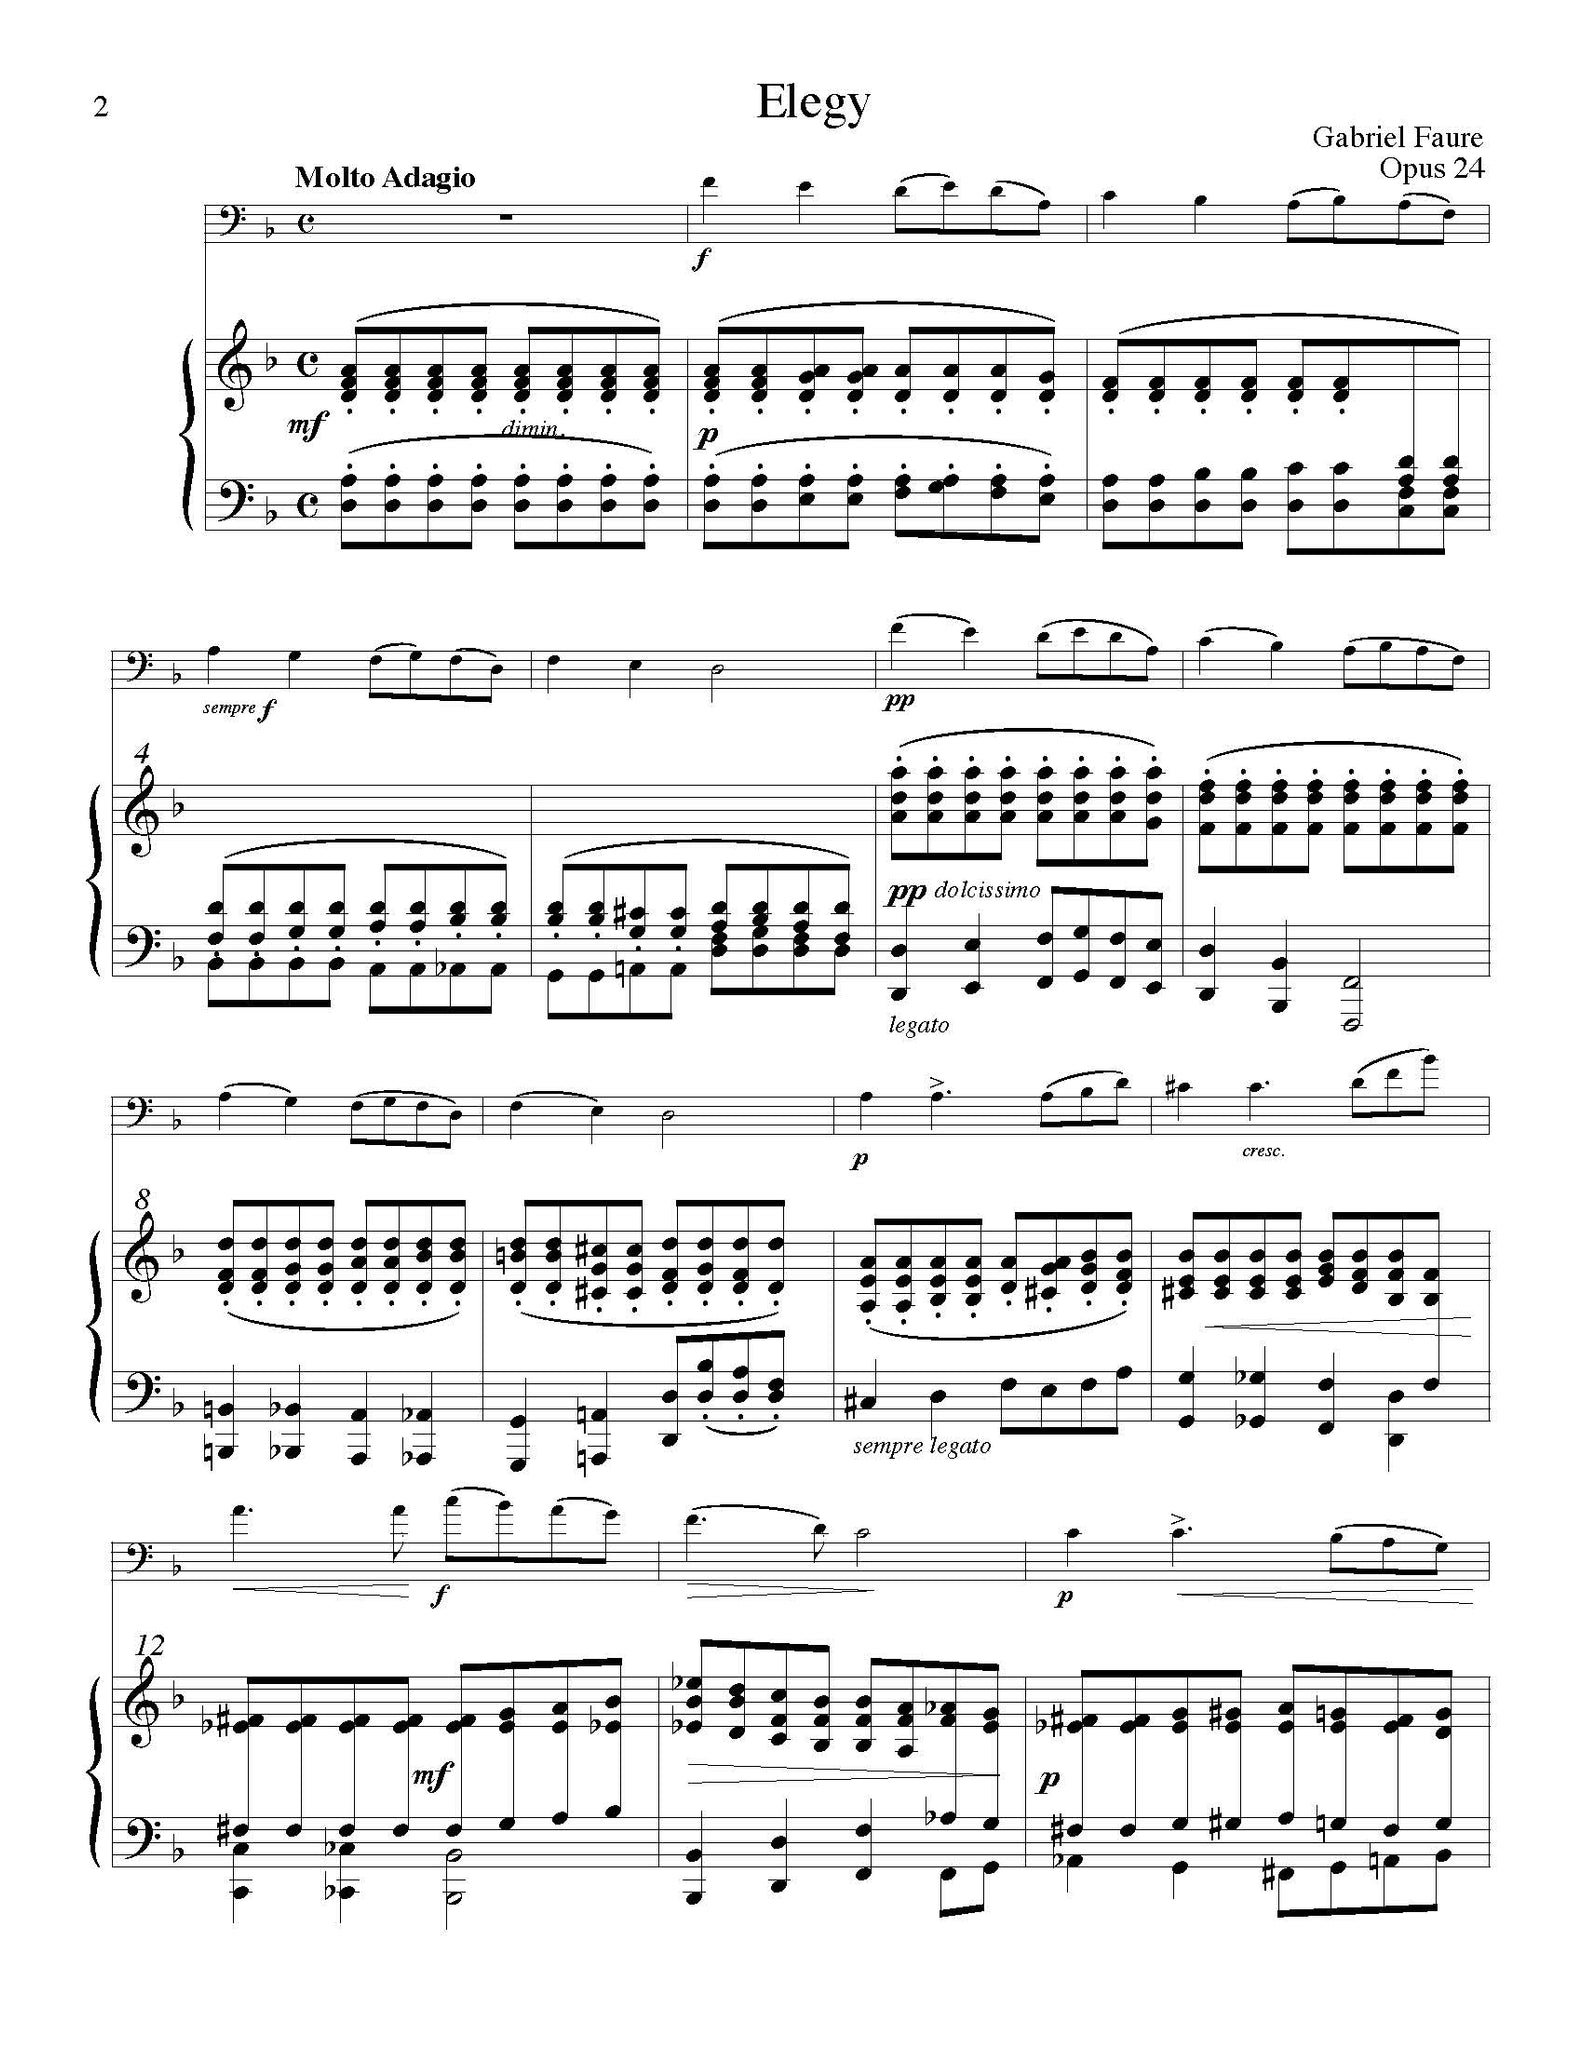 Faure Elegy d minor solo tuning page 1